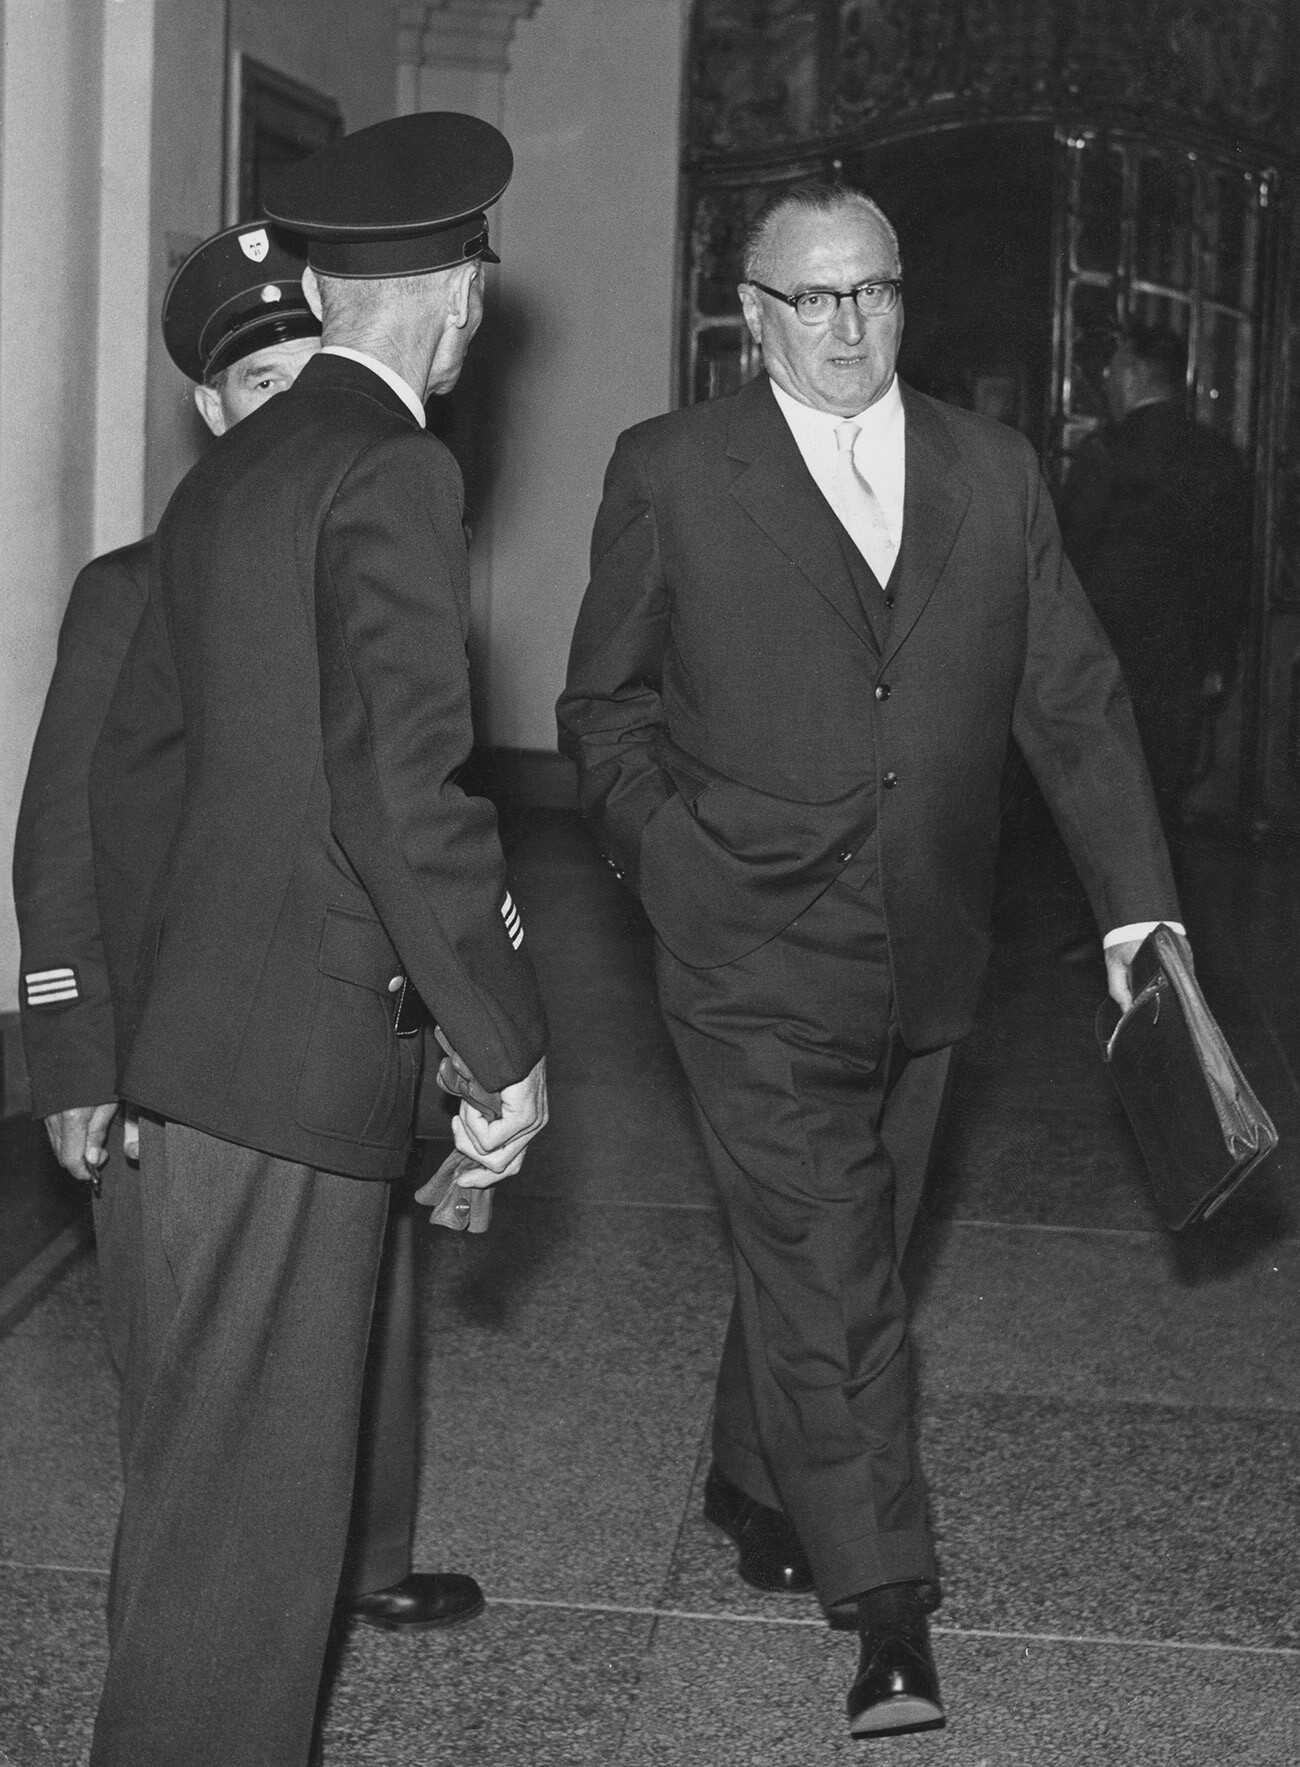 German Field Marshal Ferdinand Schörner enters the courtroom during his trial in Germany on October 4, 1957.